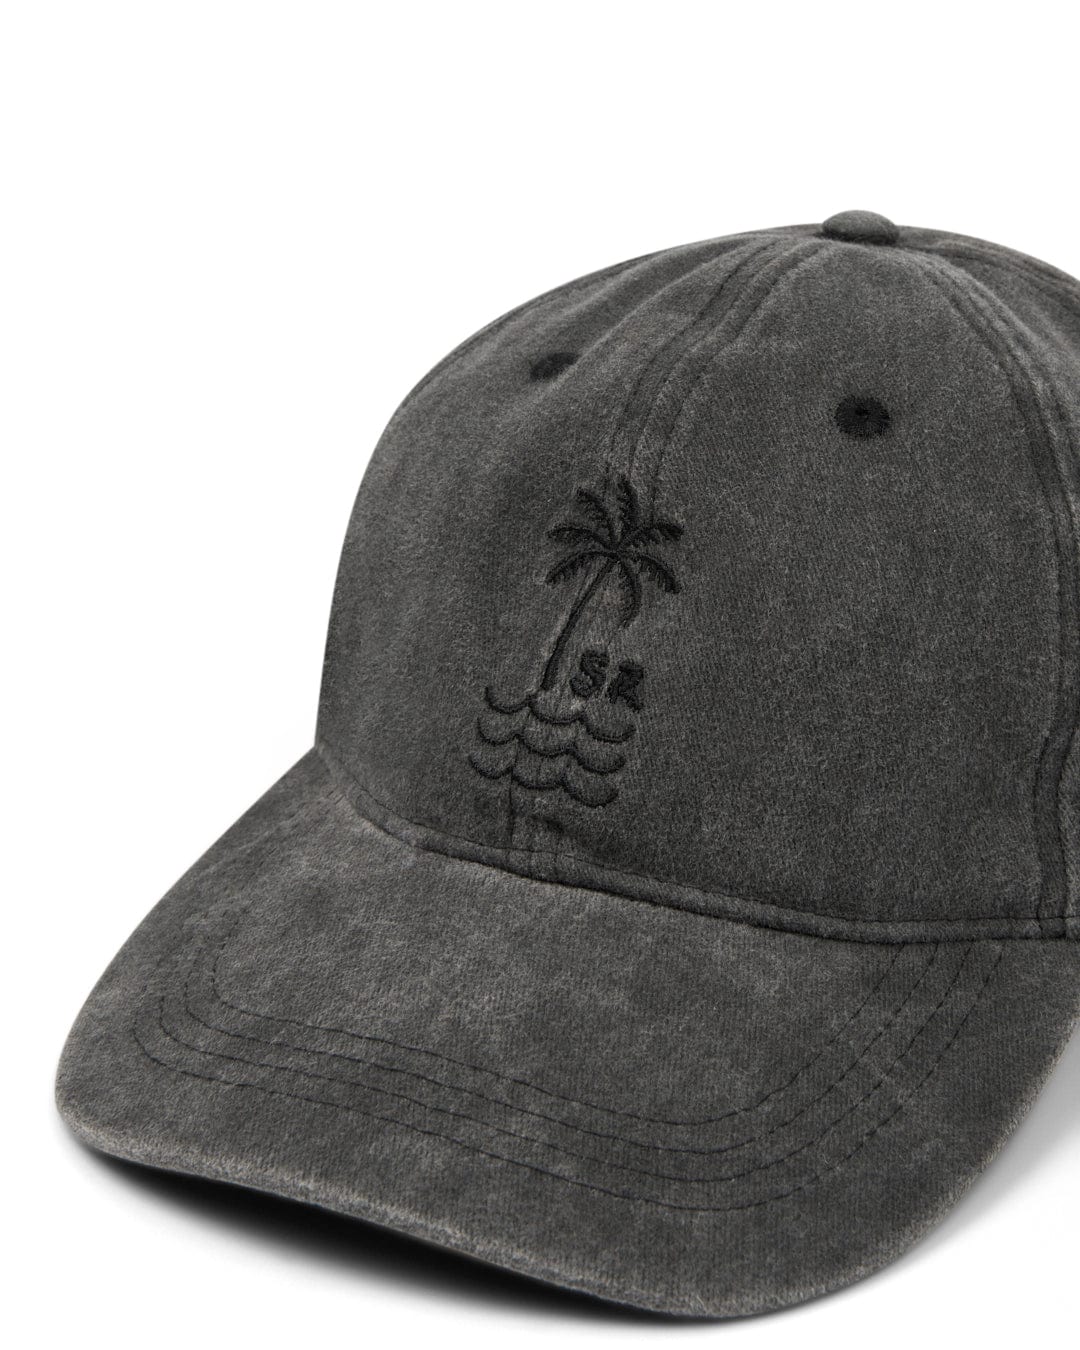 Saltrock branded Palm Cap - Dark Grey with palm tree embroidery on white background.